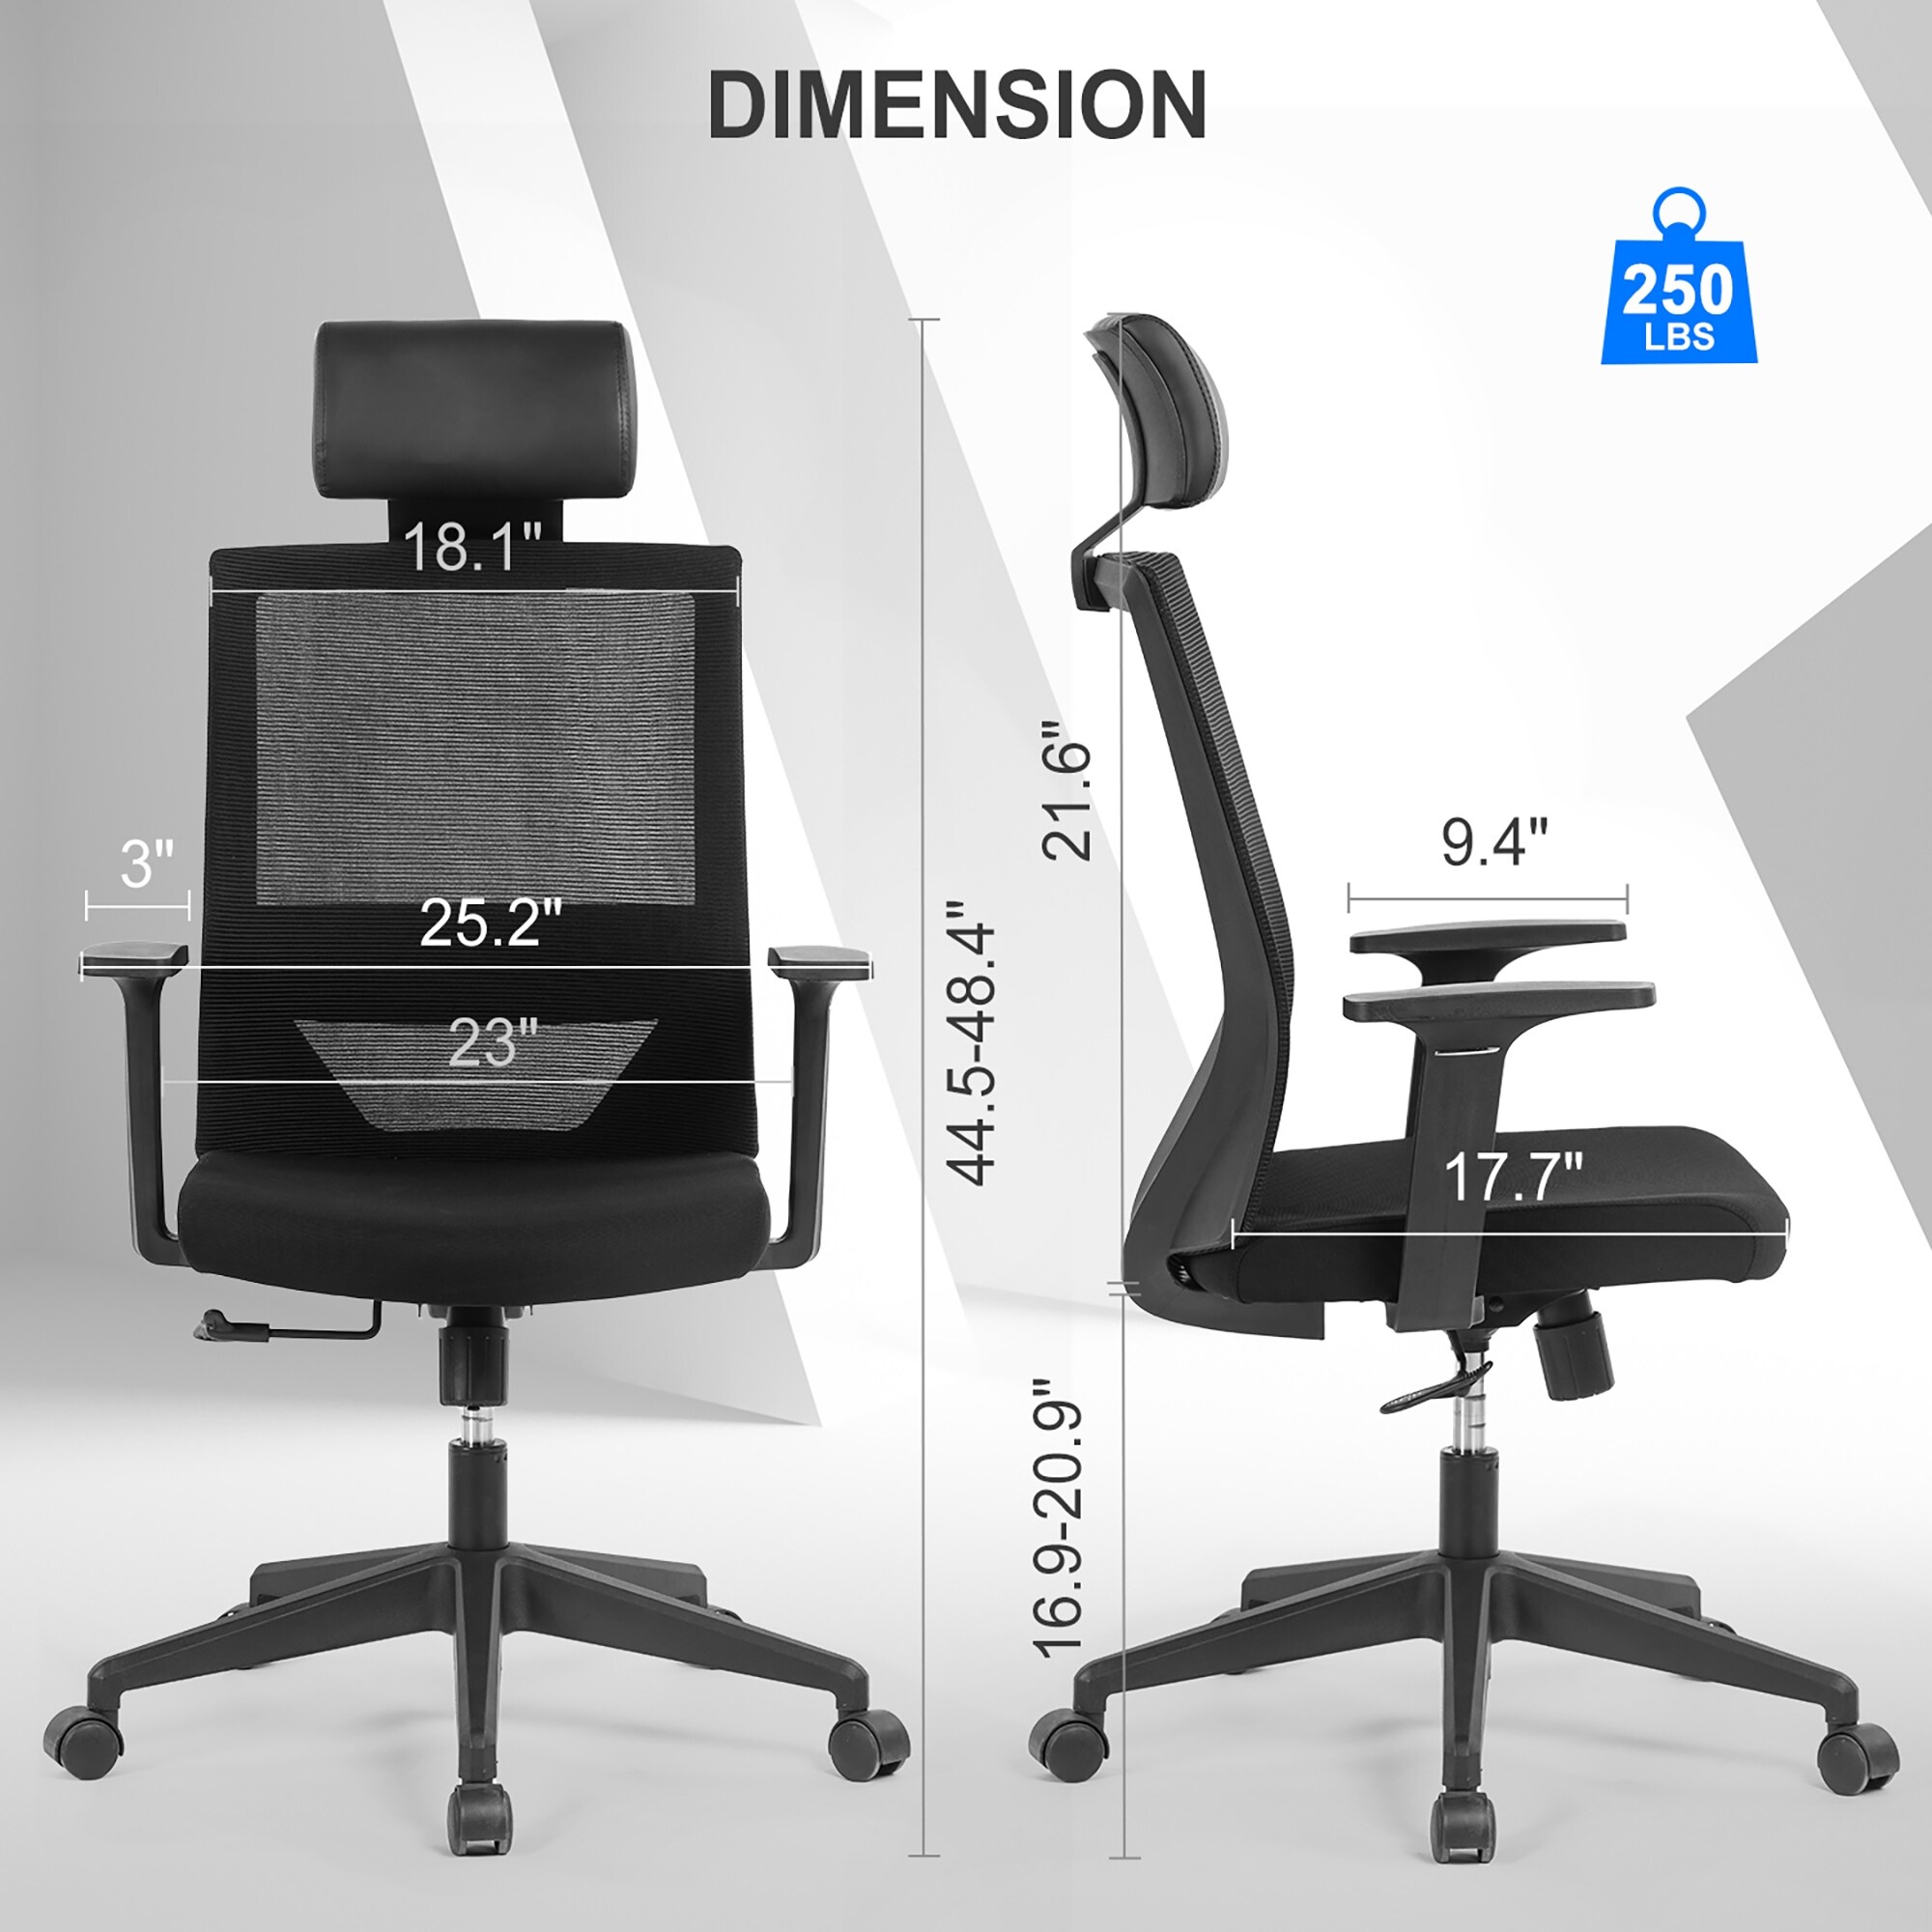 https://ak1.ostkcdn.com/images/products/is/images/direct/9ed950487e7ef6756d9b28ba7c278492e1eac034/Homall-Office-Chair-Ergonomic-Desk-Chair-with-Lumbar-Support%2CBlack.jpg